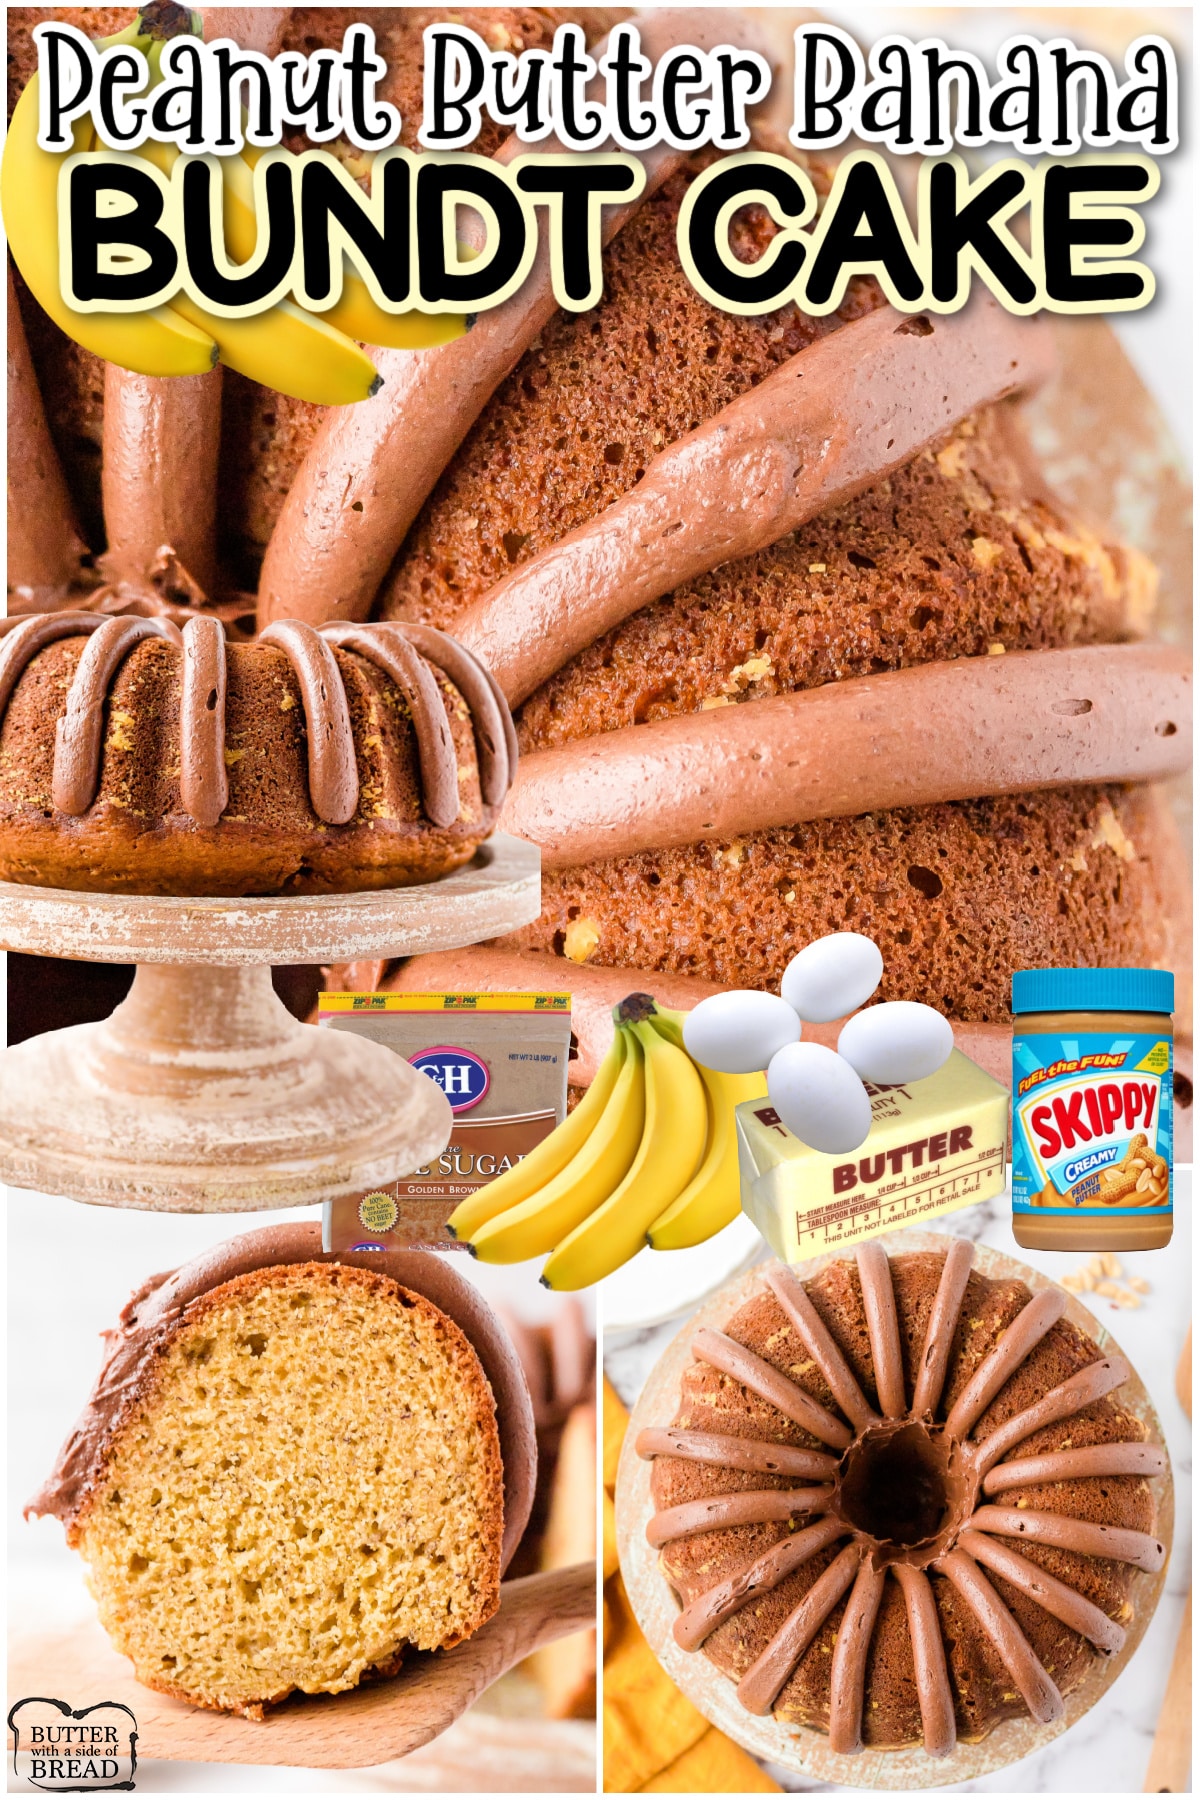 Peanut Butter Banana Bundt Cake made from scratch with ripe bananas & creamy peanut butter! Moist banana bundt cake iced with an incredible chocolate cream cheese frosting!